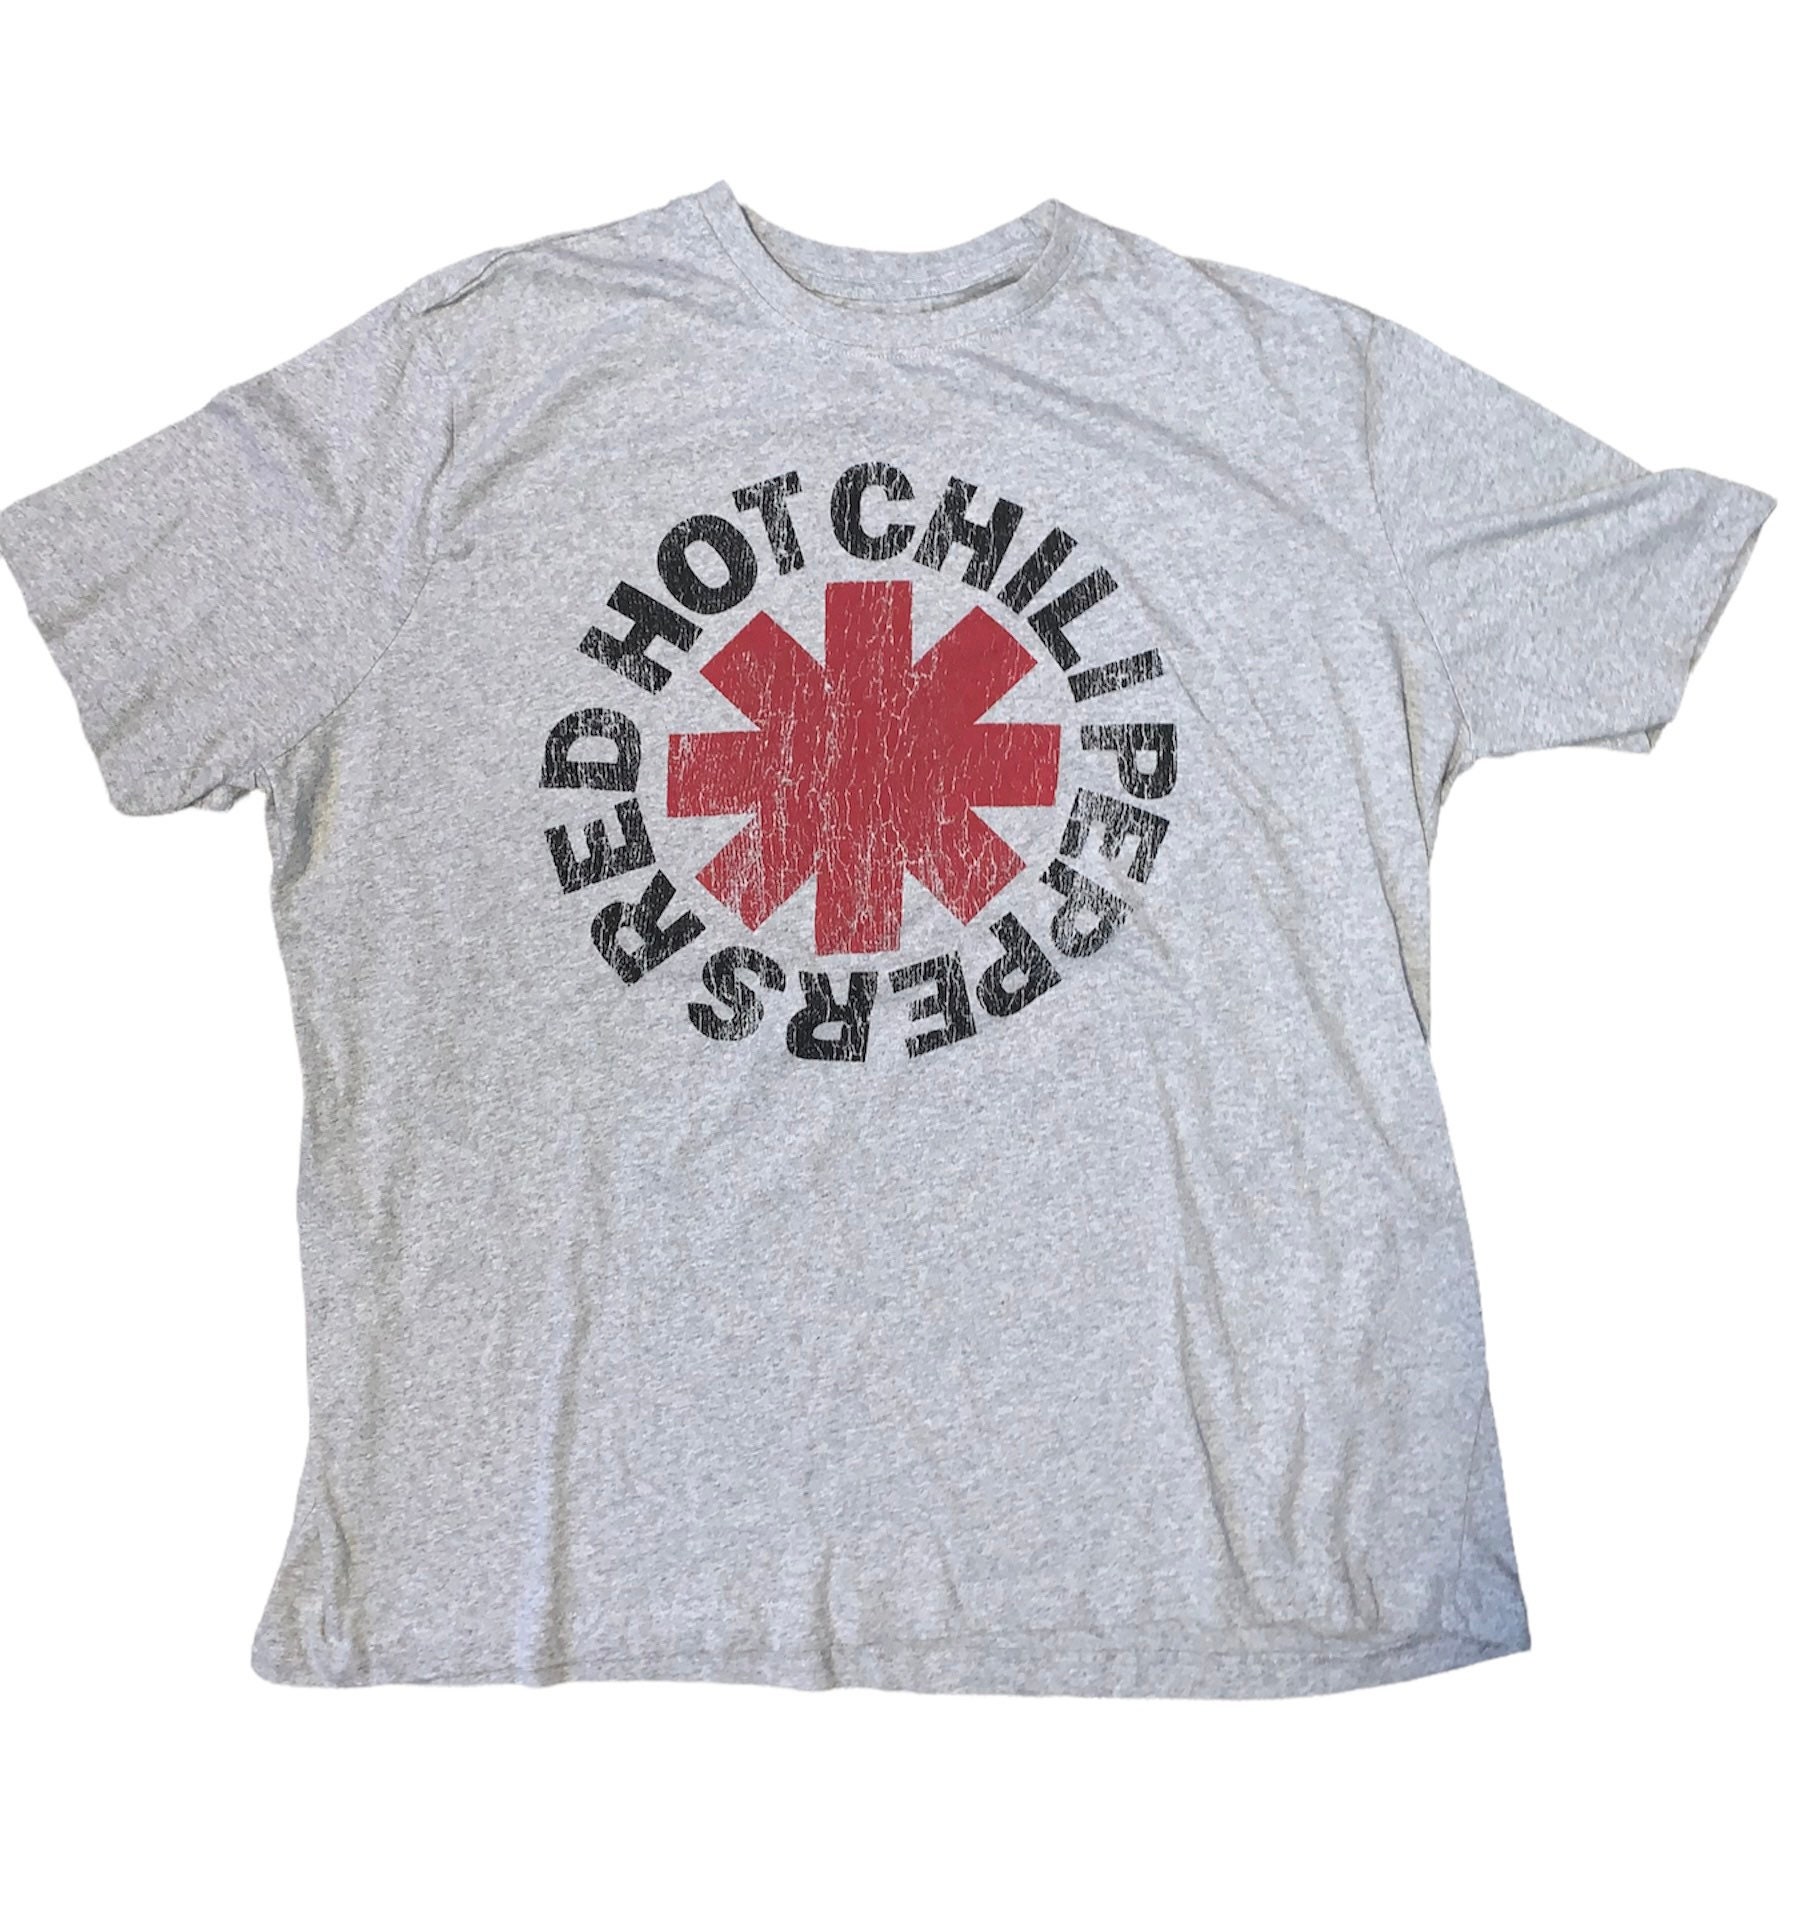 Discover Red Hot Chili Peppers Band Shirt